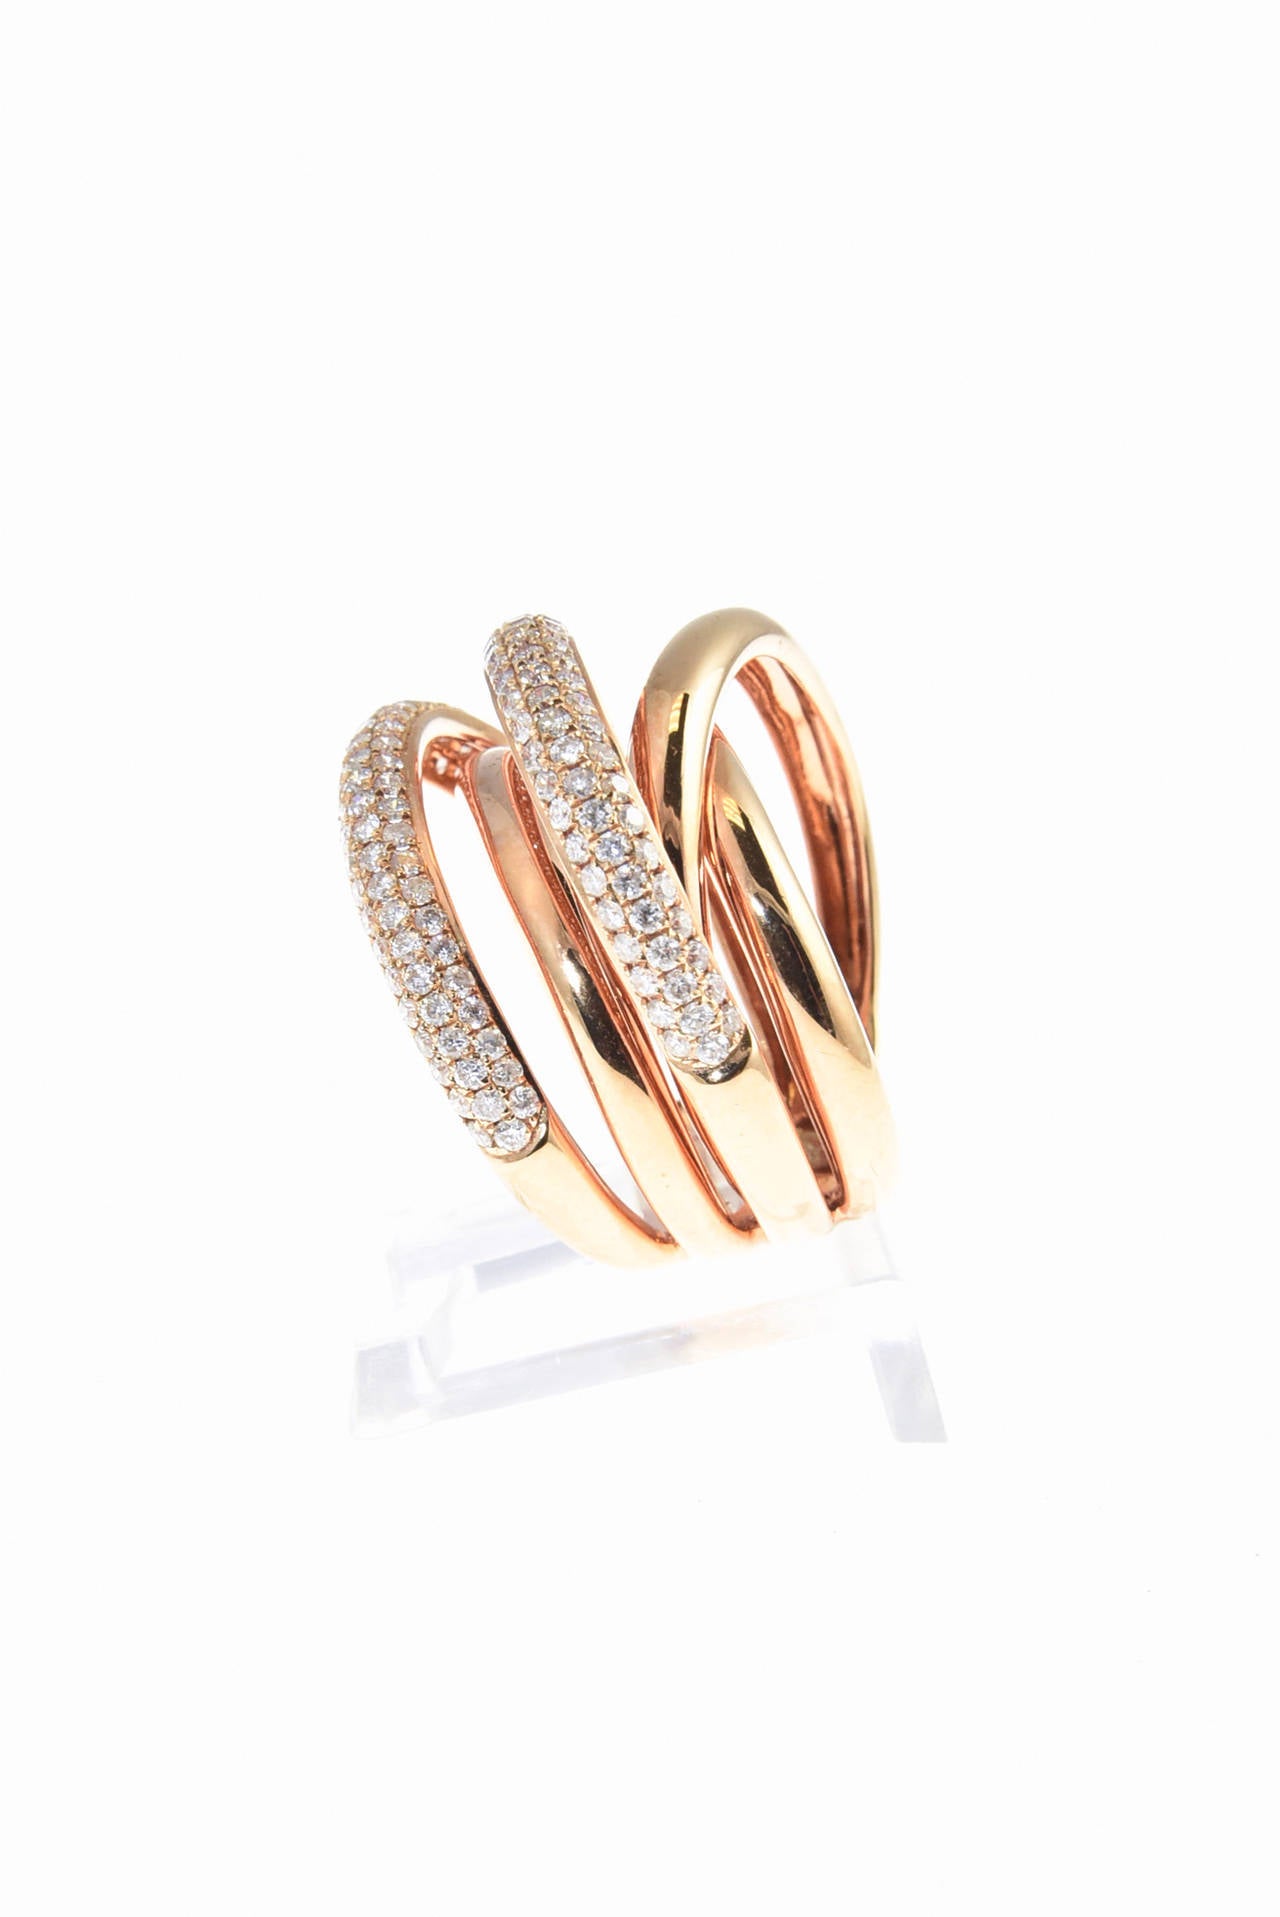 Beautifully made 18k Rose gold ring with pave set diamonds bands intersecting with rose color bands.

US size 6.25 

Marked 18k BA